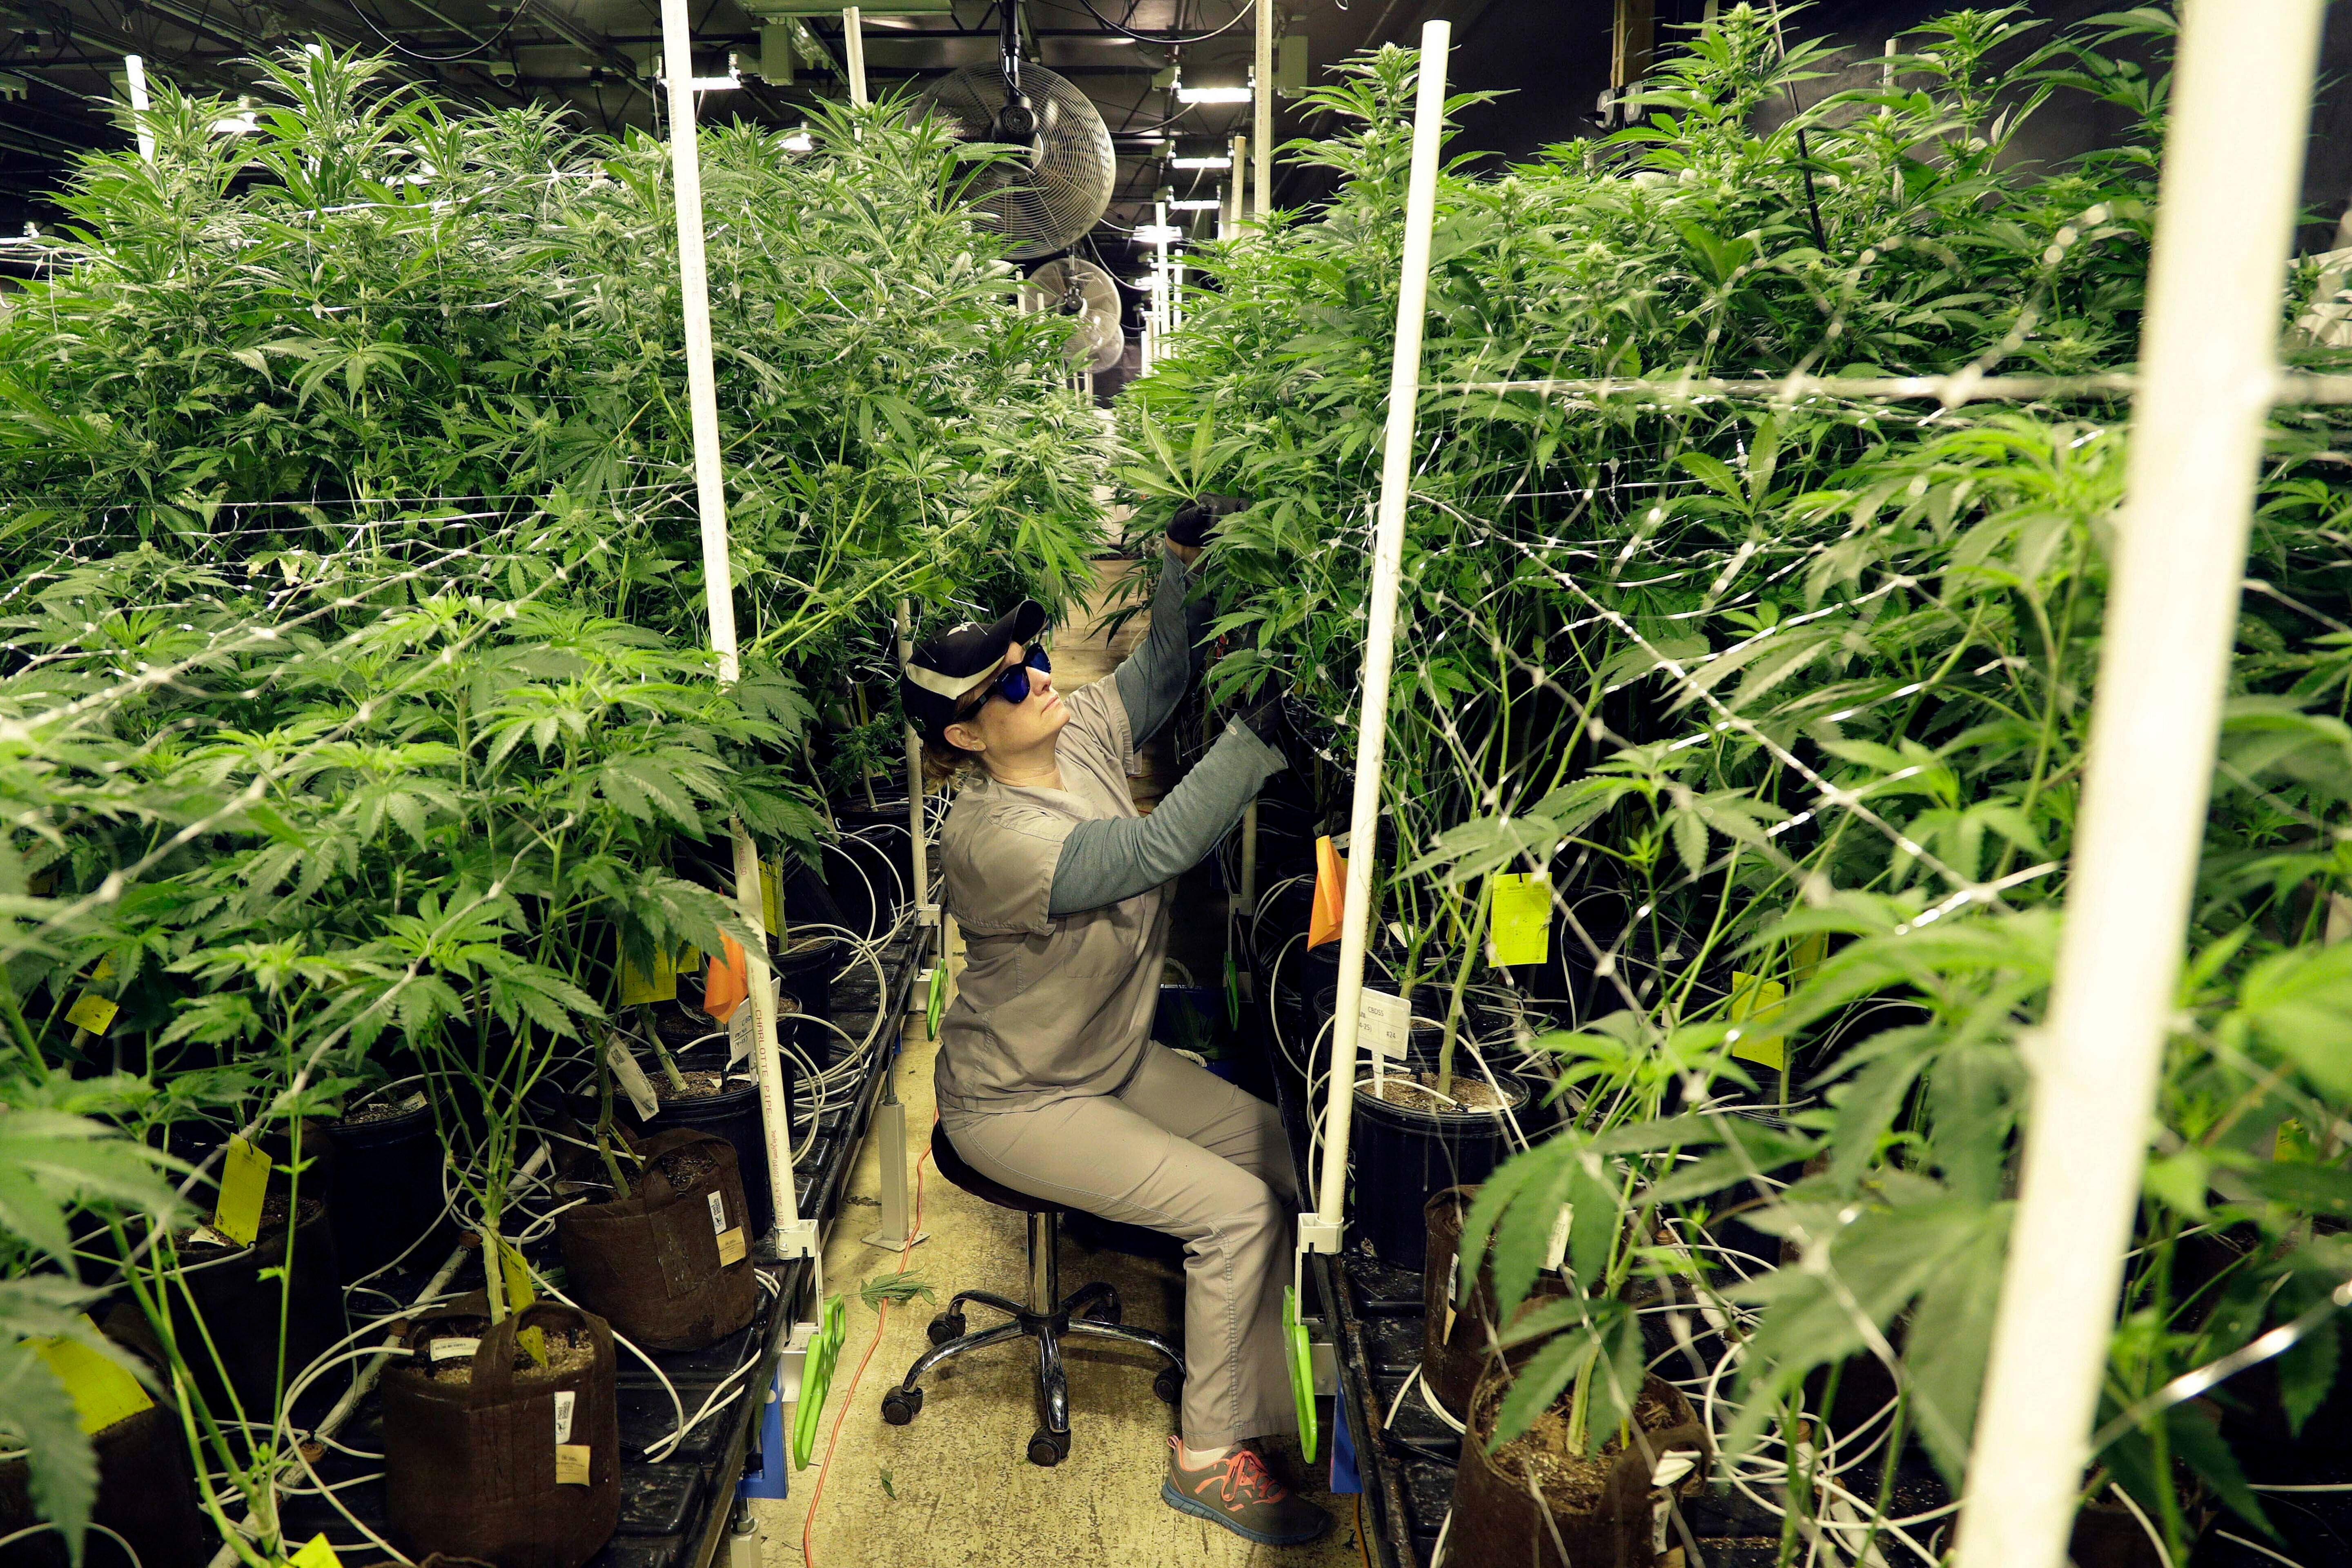 FILE - In this March 22, 2019, file photo, Heather Randazzo, a grow employee at Compassionate Care Foundation's medical marijuana dispensary, trims leaves off marijuana plants in the company's grow house in Egg Harbor Township, N.J.